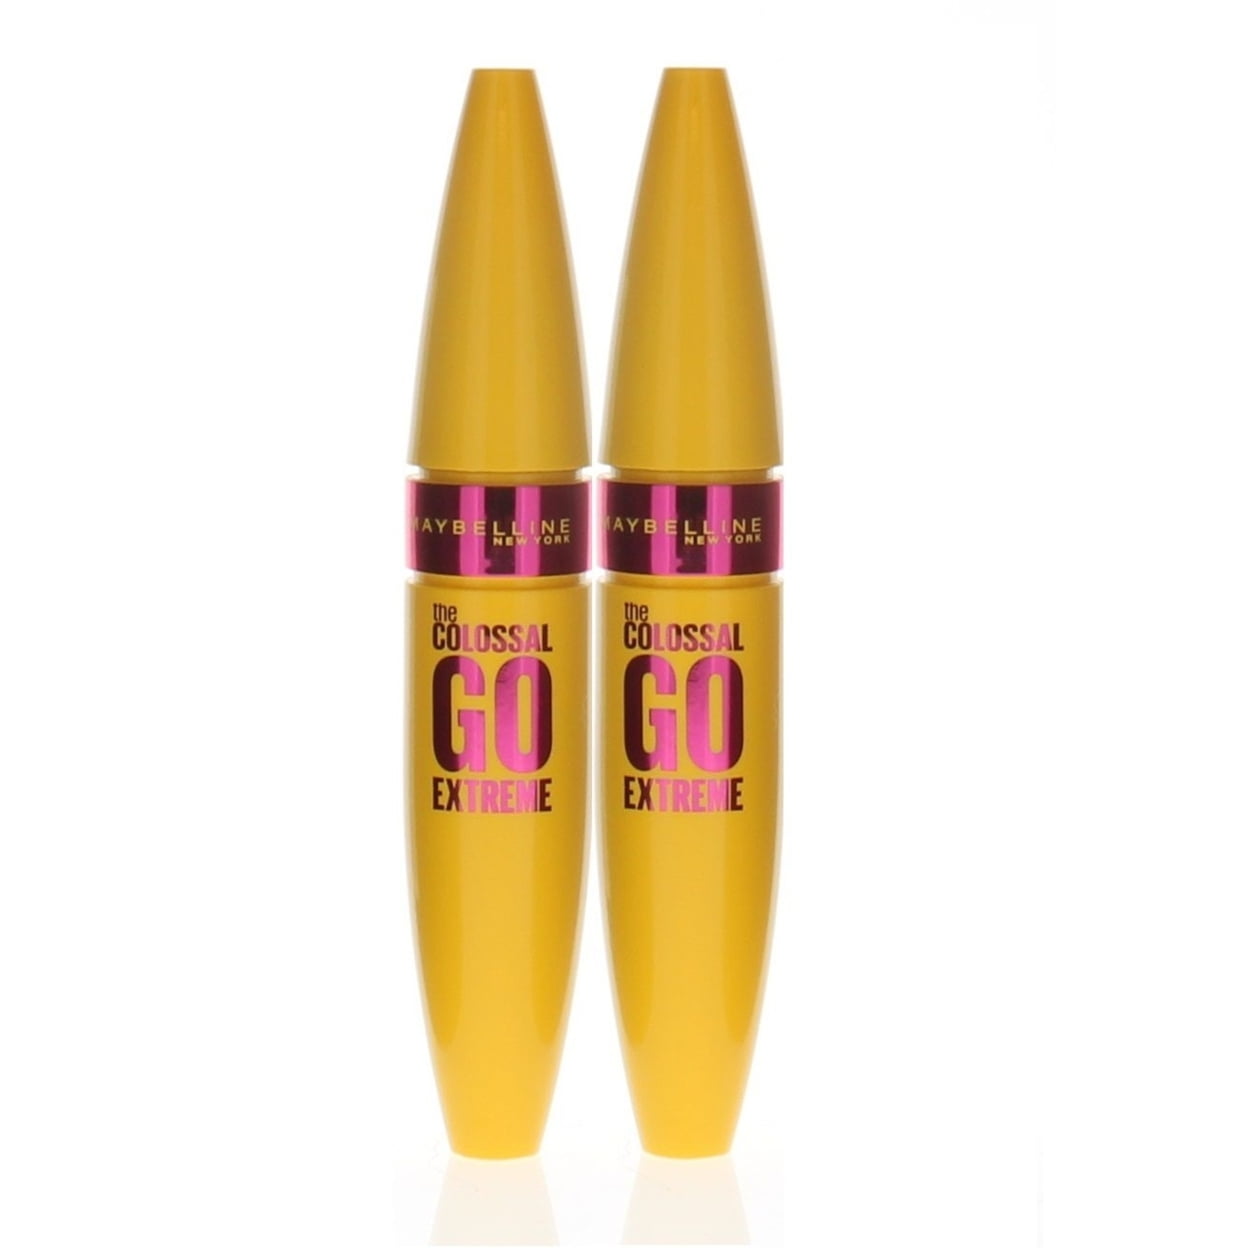 Extreme Black Pack) Mascara Colossal (2 The Very Go Maybelline 9.5ml